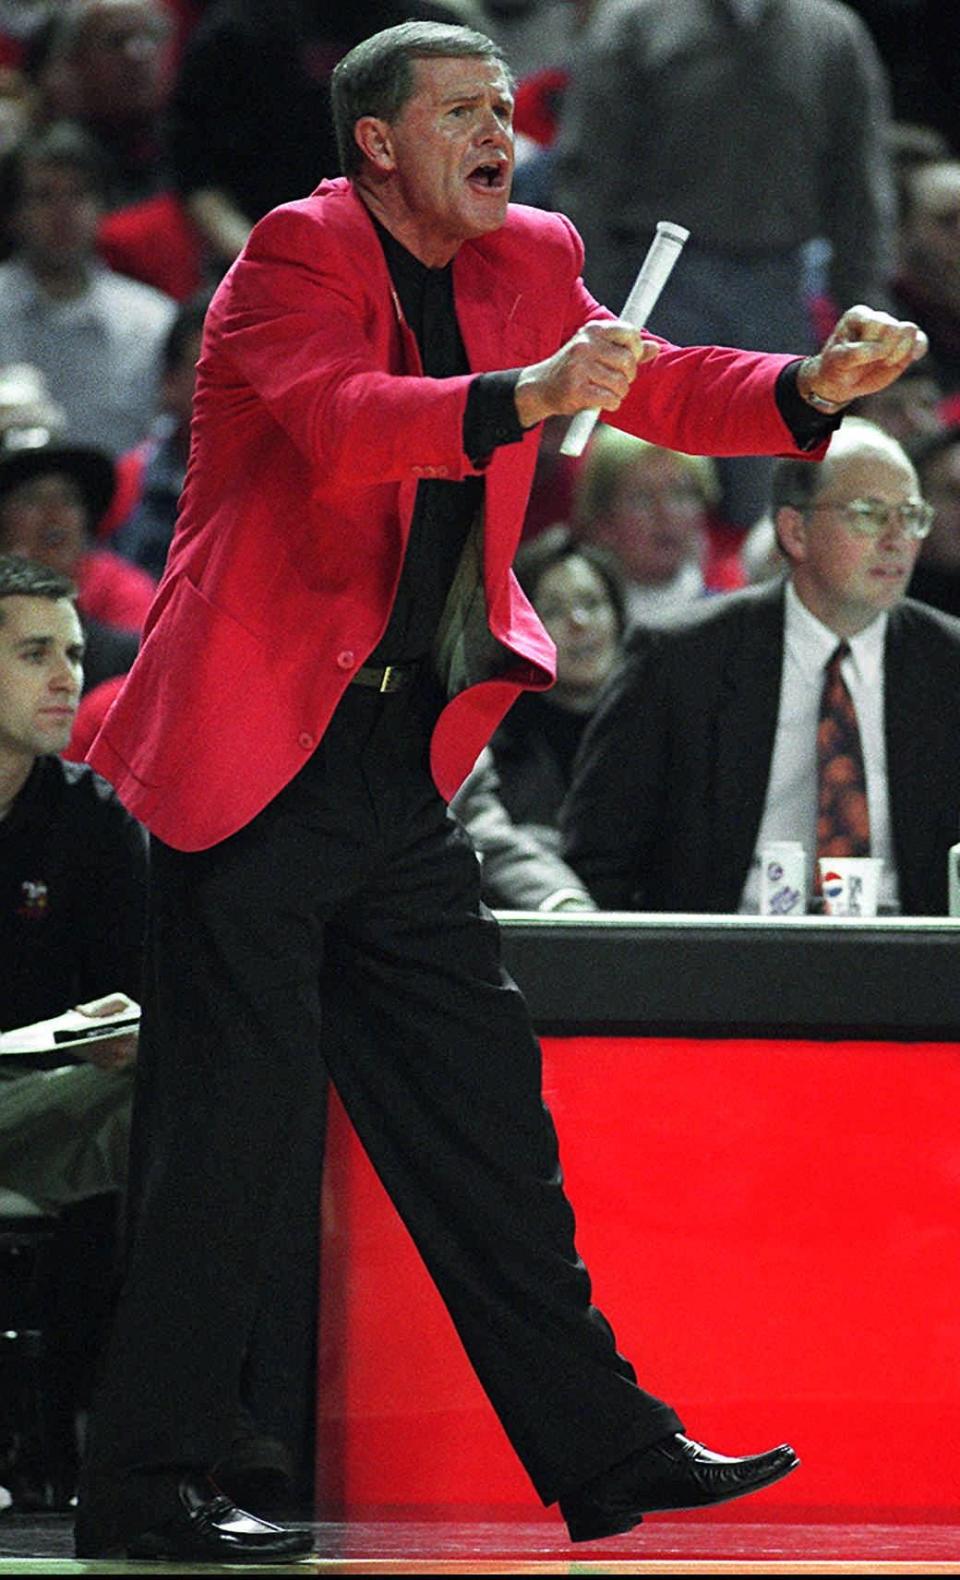 UofL coach Denny Crum reacts during the Cards game against Georgia Tech. The win gave Crum his 600th victory.1/11/97